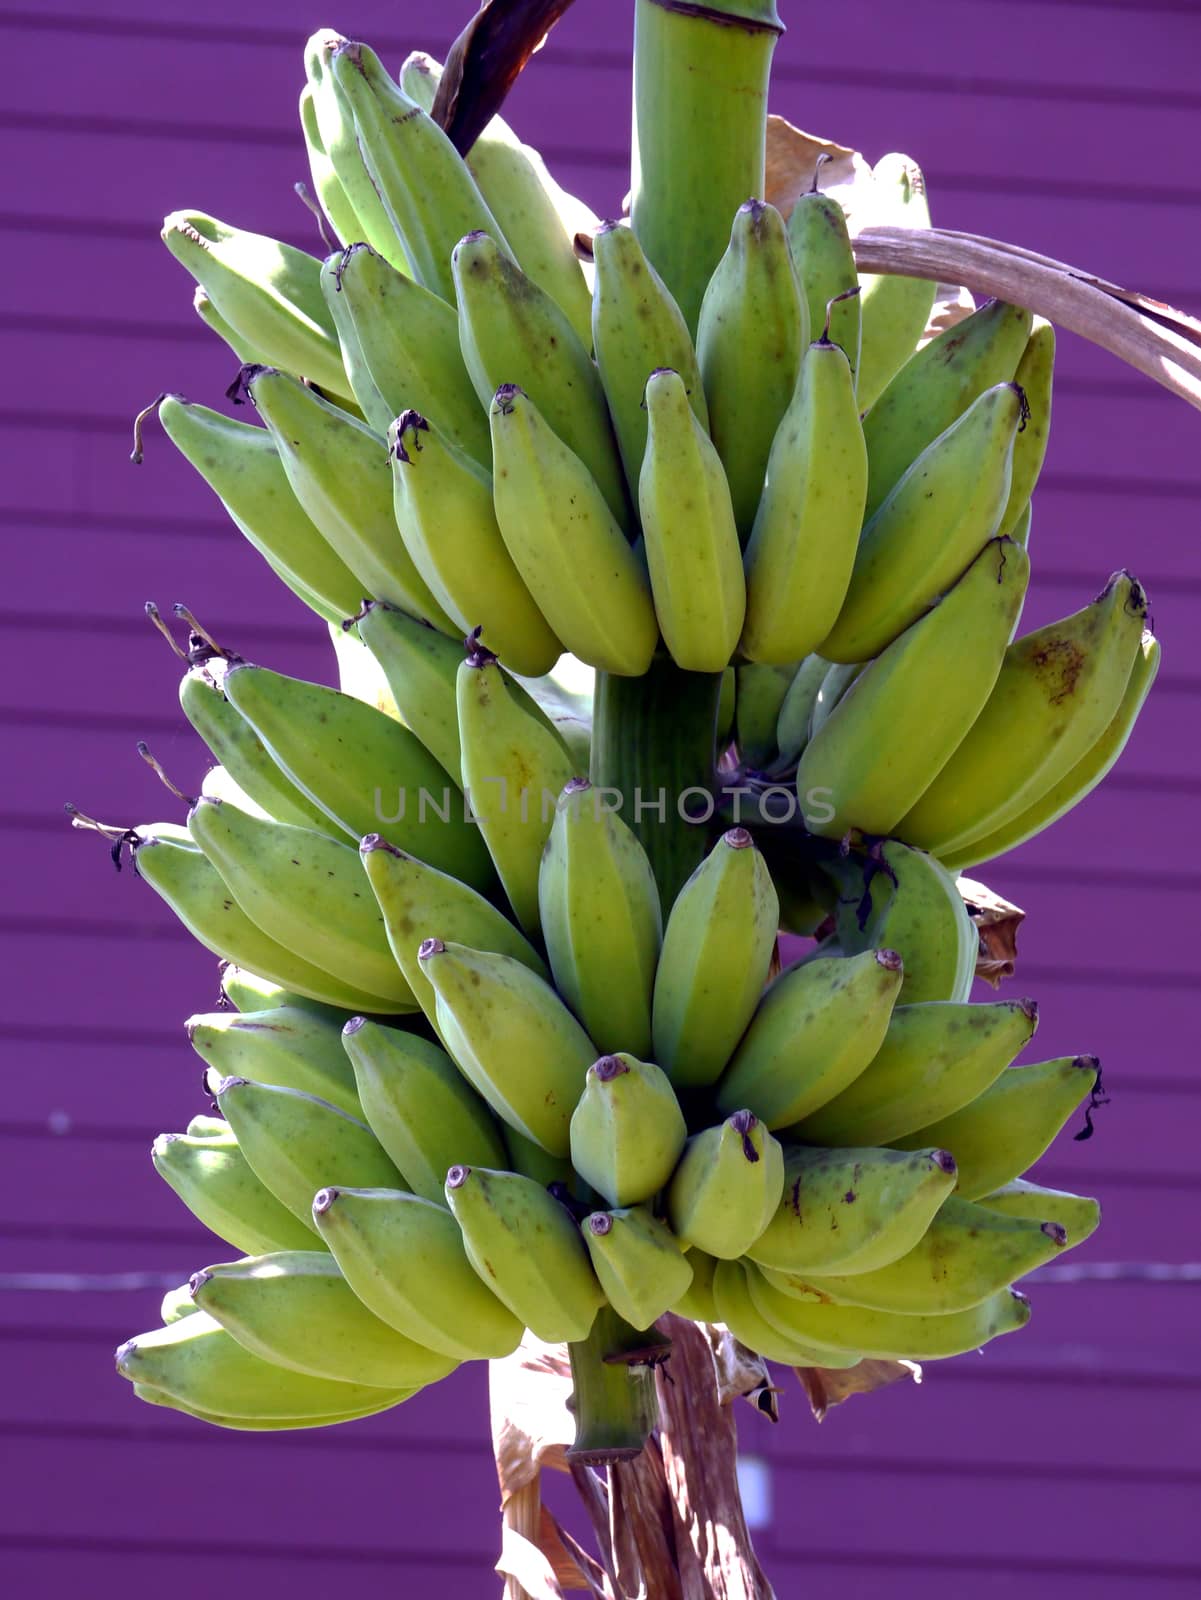 Bunch of bananas on tree by Noppharat_th